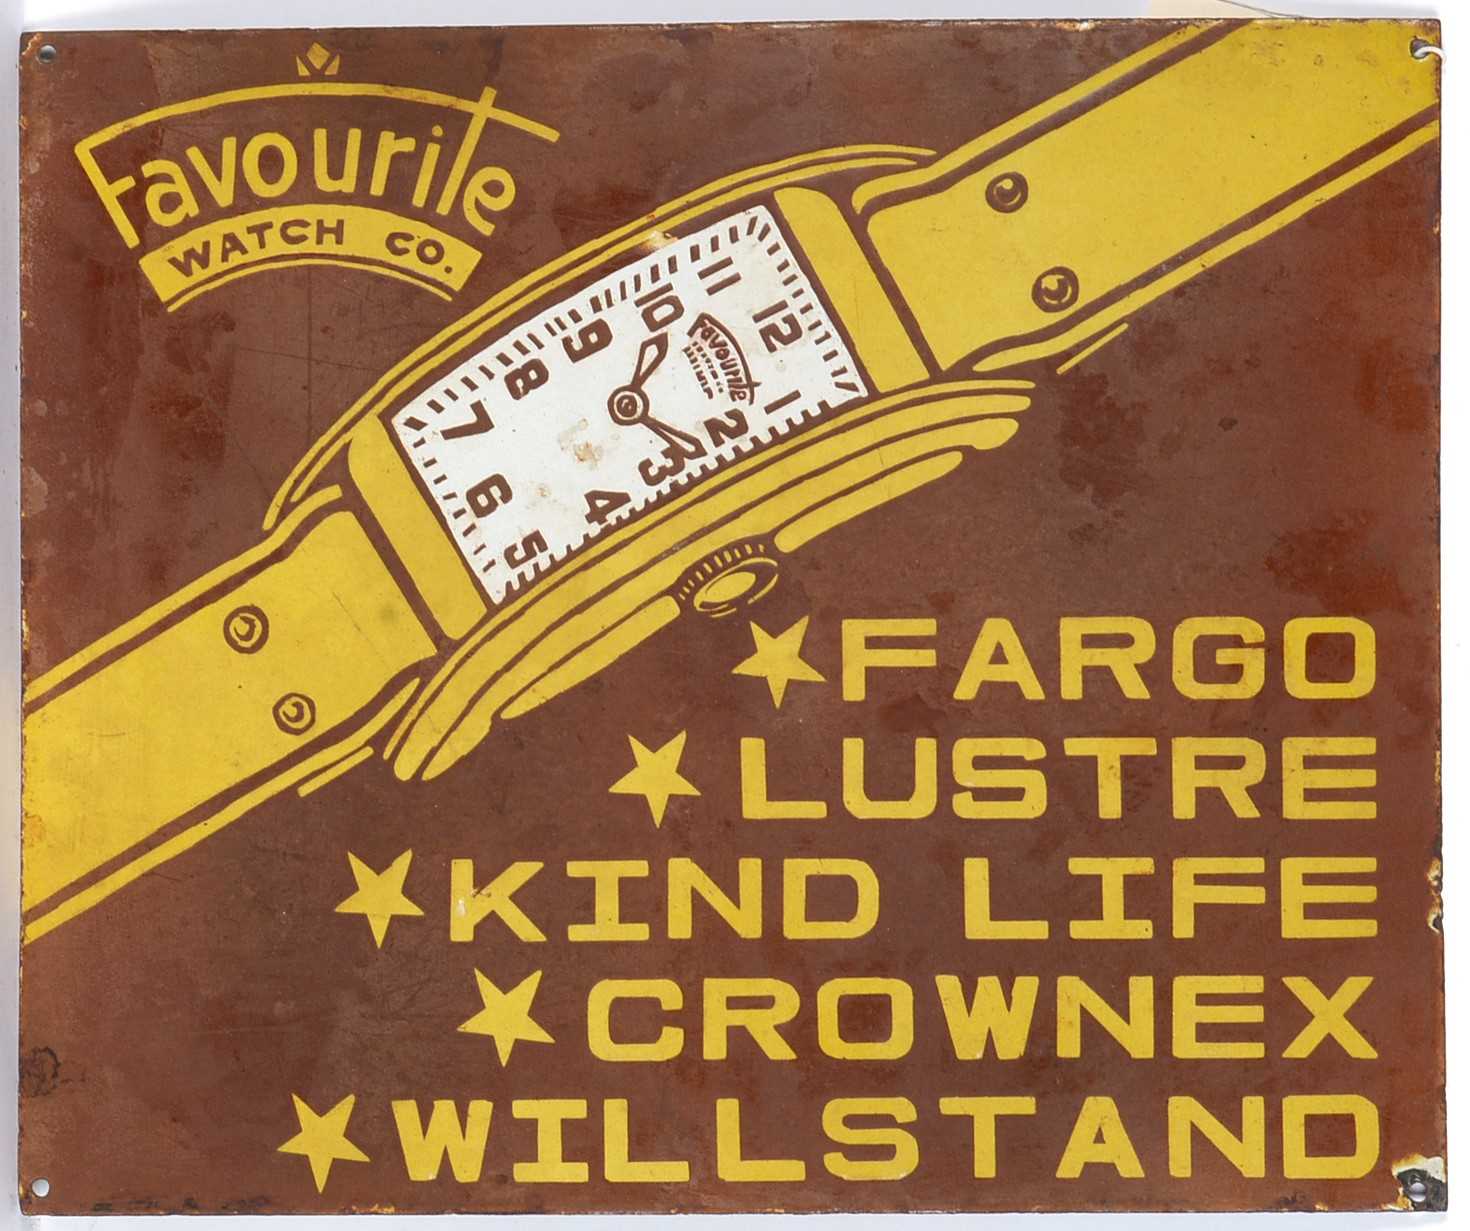 Favourite Watch Co. enamel advertising sign, - Image 2 of 3